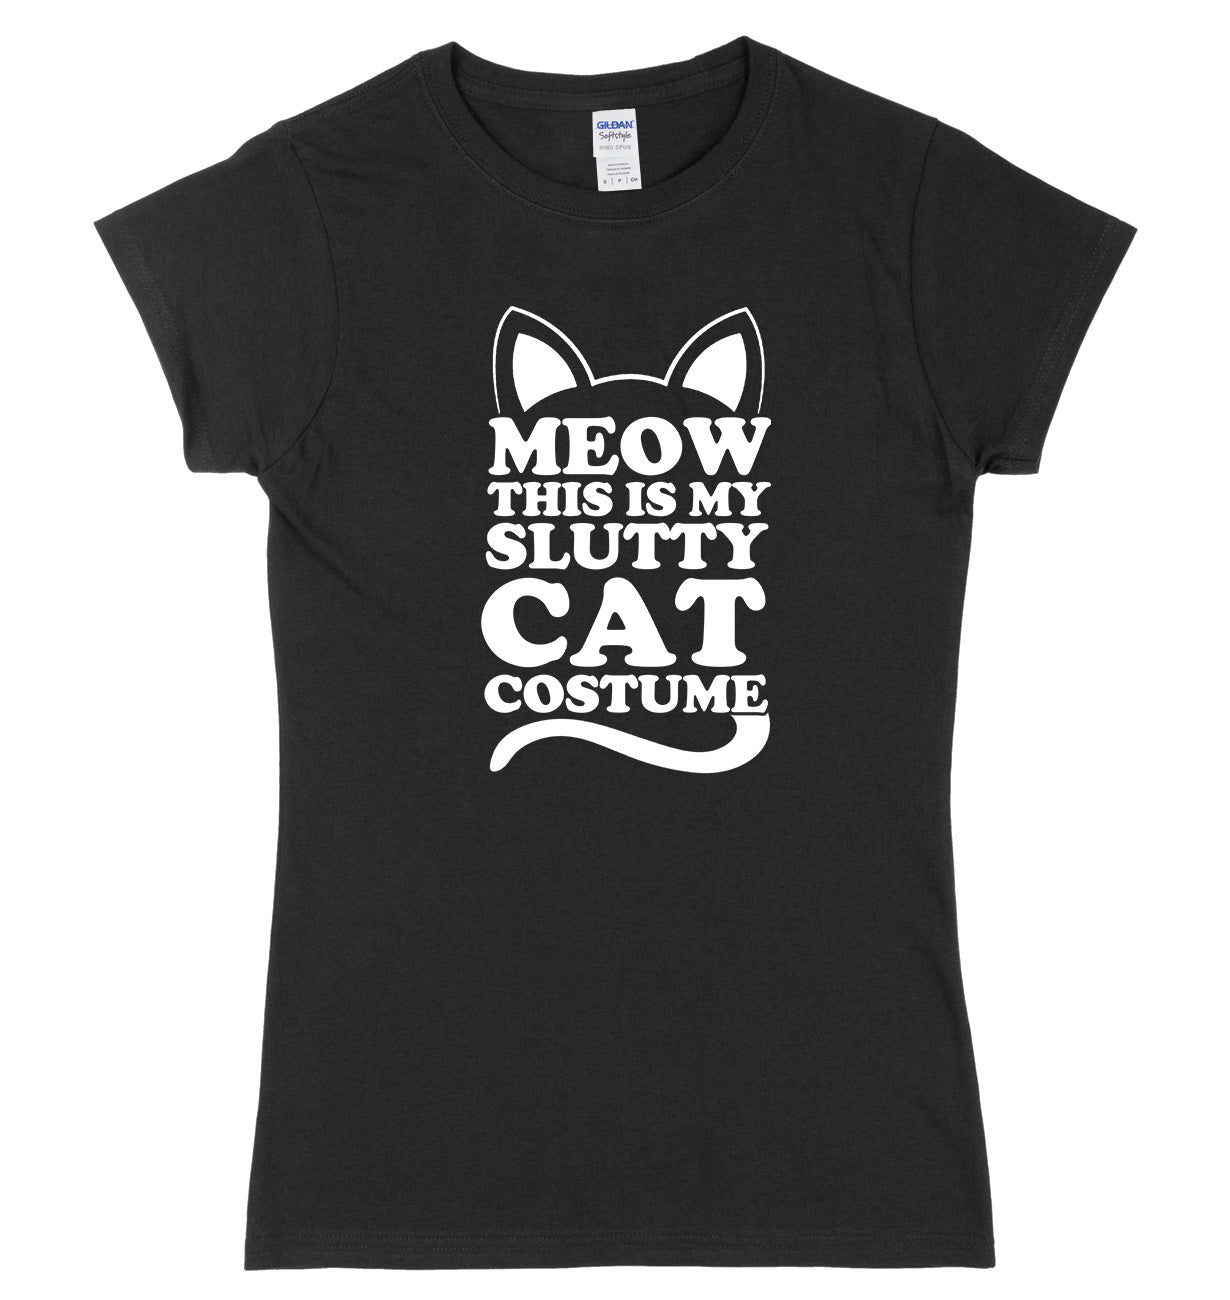 Meow This Is My Slutty Cat Costume Womens Ladies Slim Fit Halloween T-Shirt